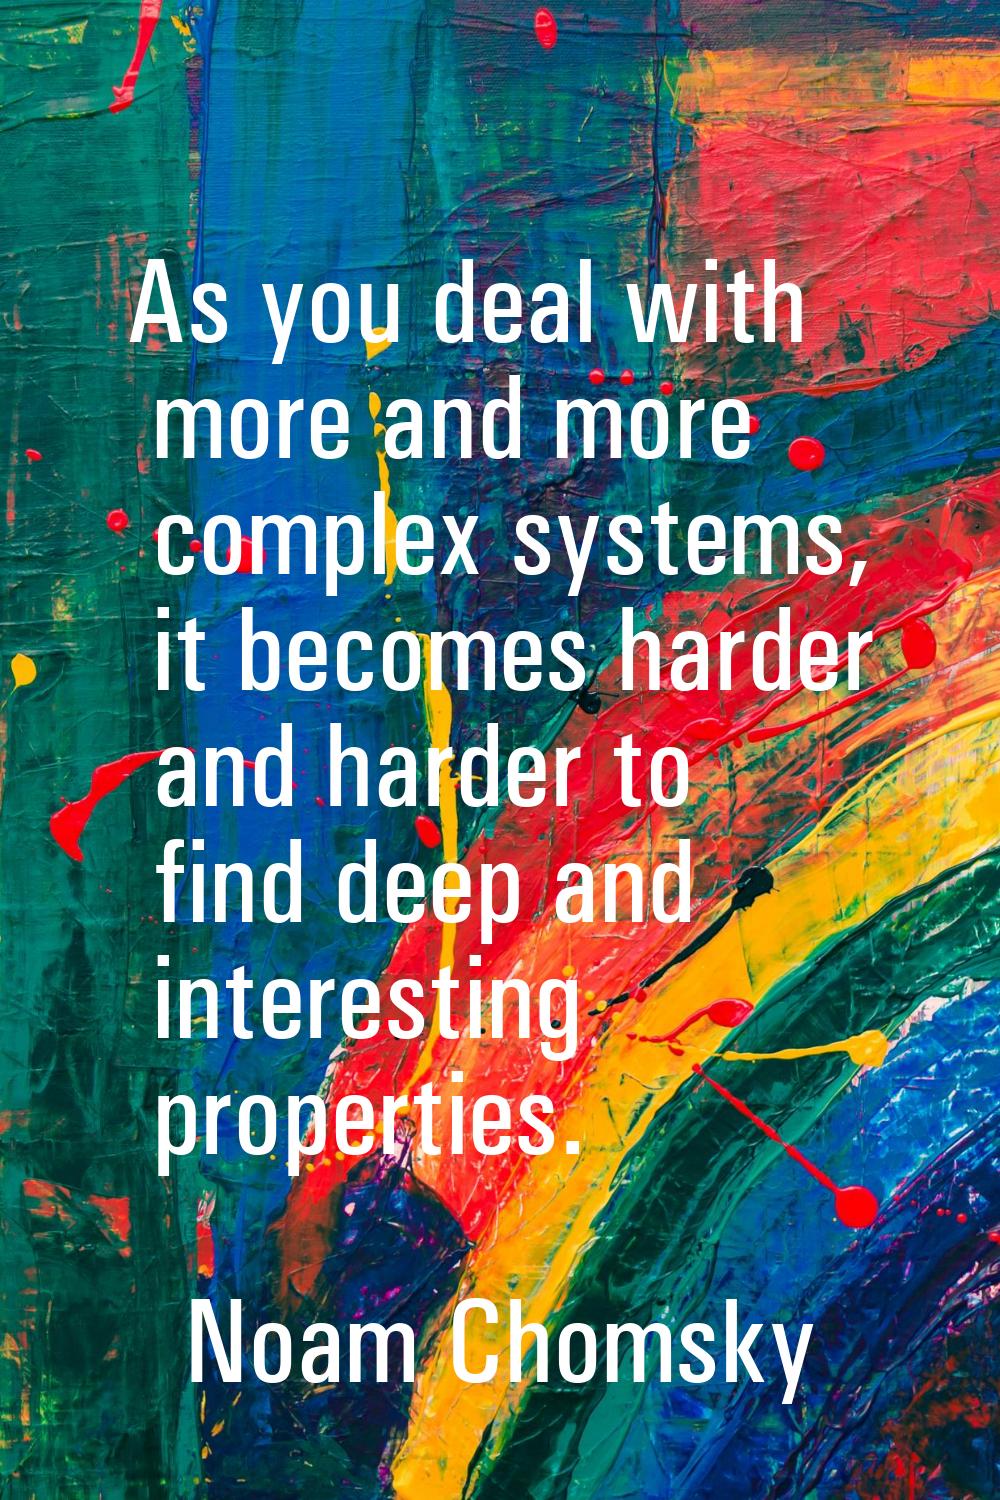 As you deal with more and more complex systems, it becomes harder and harder to find deep and inter